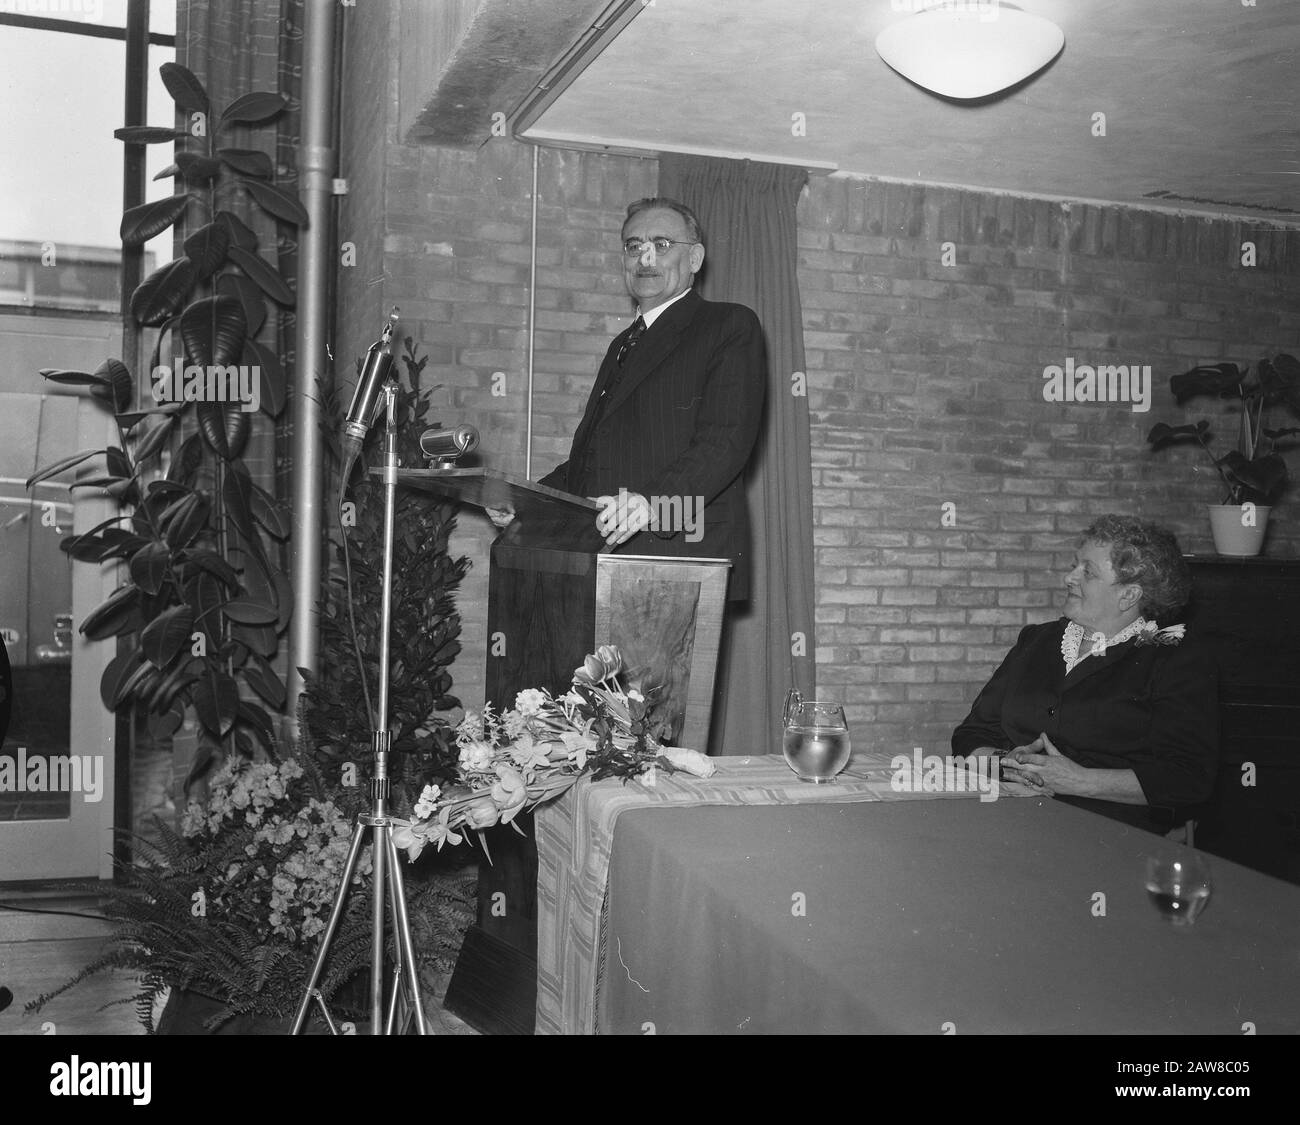 Opening of the Willem Drees House in Amsterdam. Speech by Dr. W. Drees. Date: February 5, 1957 Location: Amsterdam, Noord-Holland Keywords: retirement homes, openings, speeches Person Name: Drees, Willem Institution Name: Willem Drees House Stock Photo